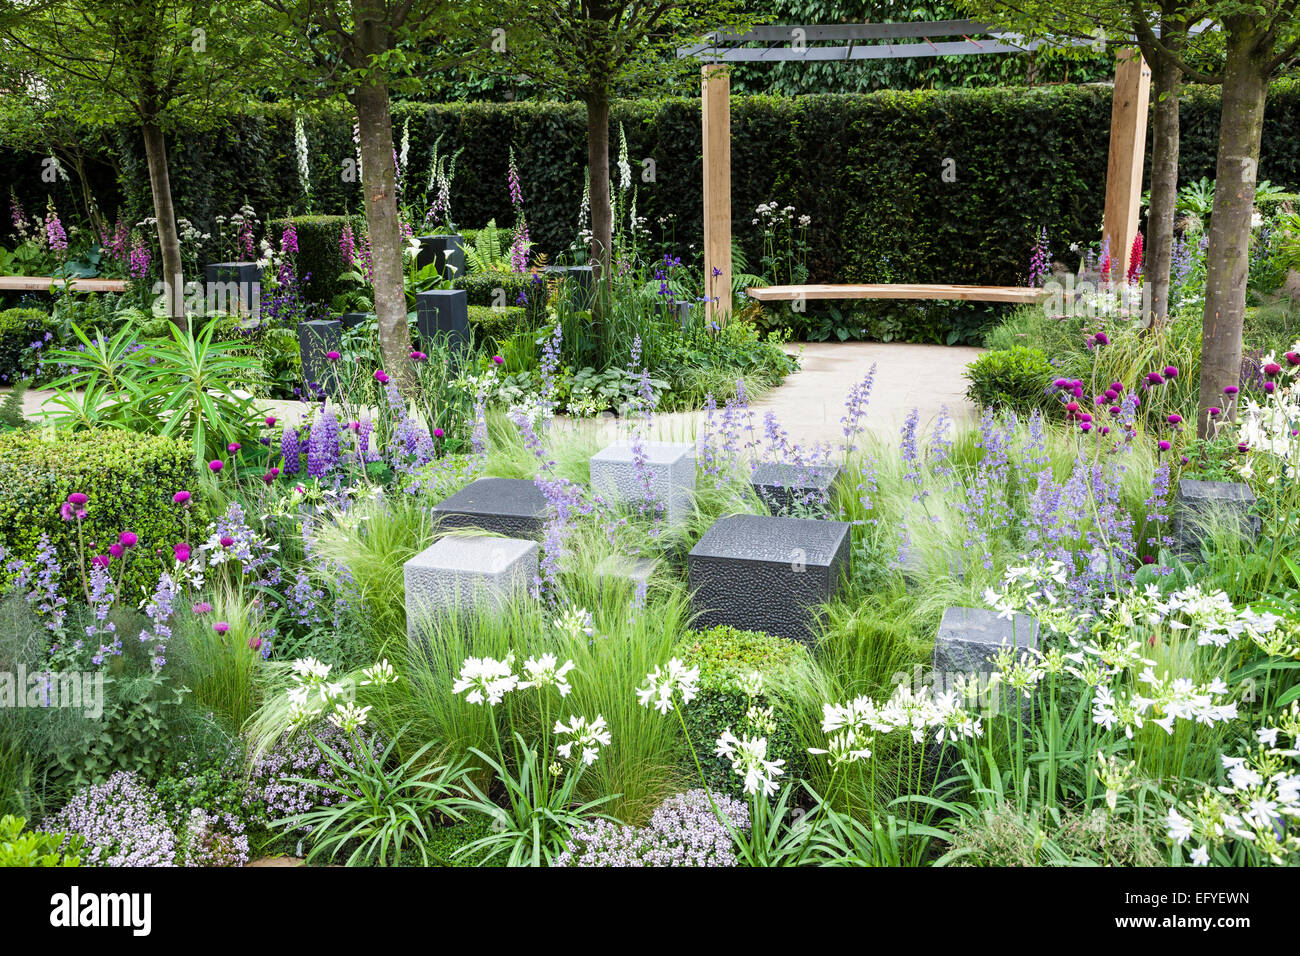 Garden with bench, pergola, granite blocks, box cubes and mixed planting of grasses, catmint, foxgloves and agapanthus Stock Photo